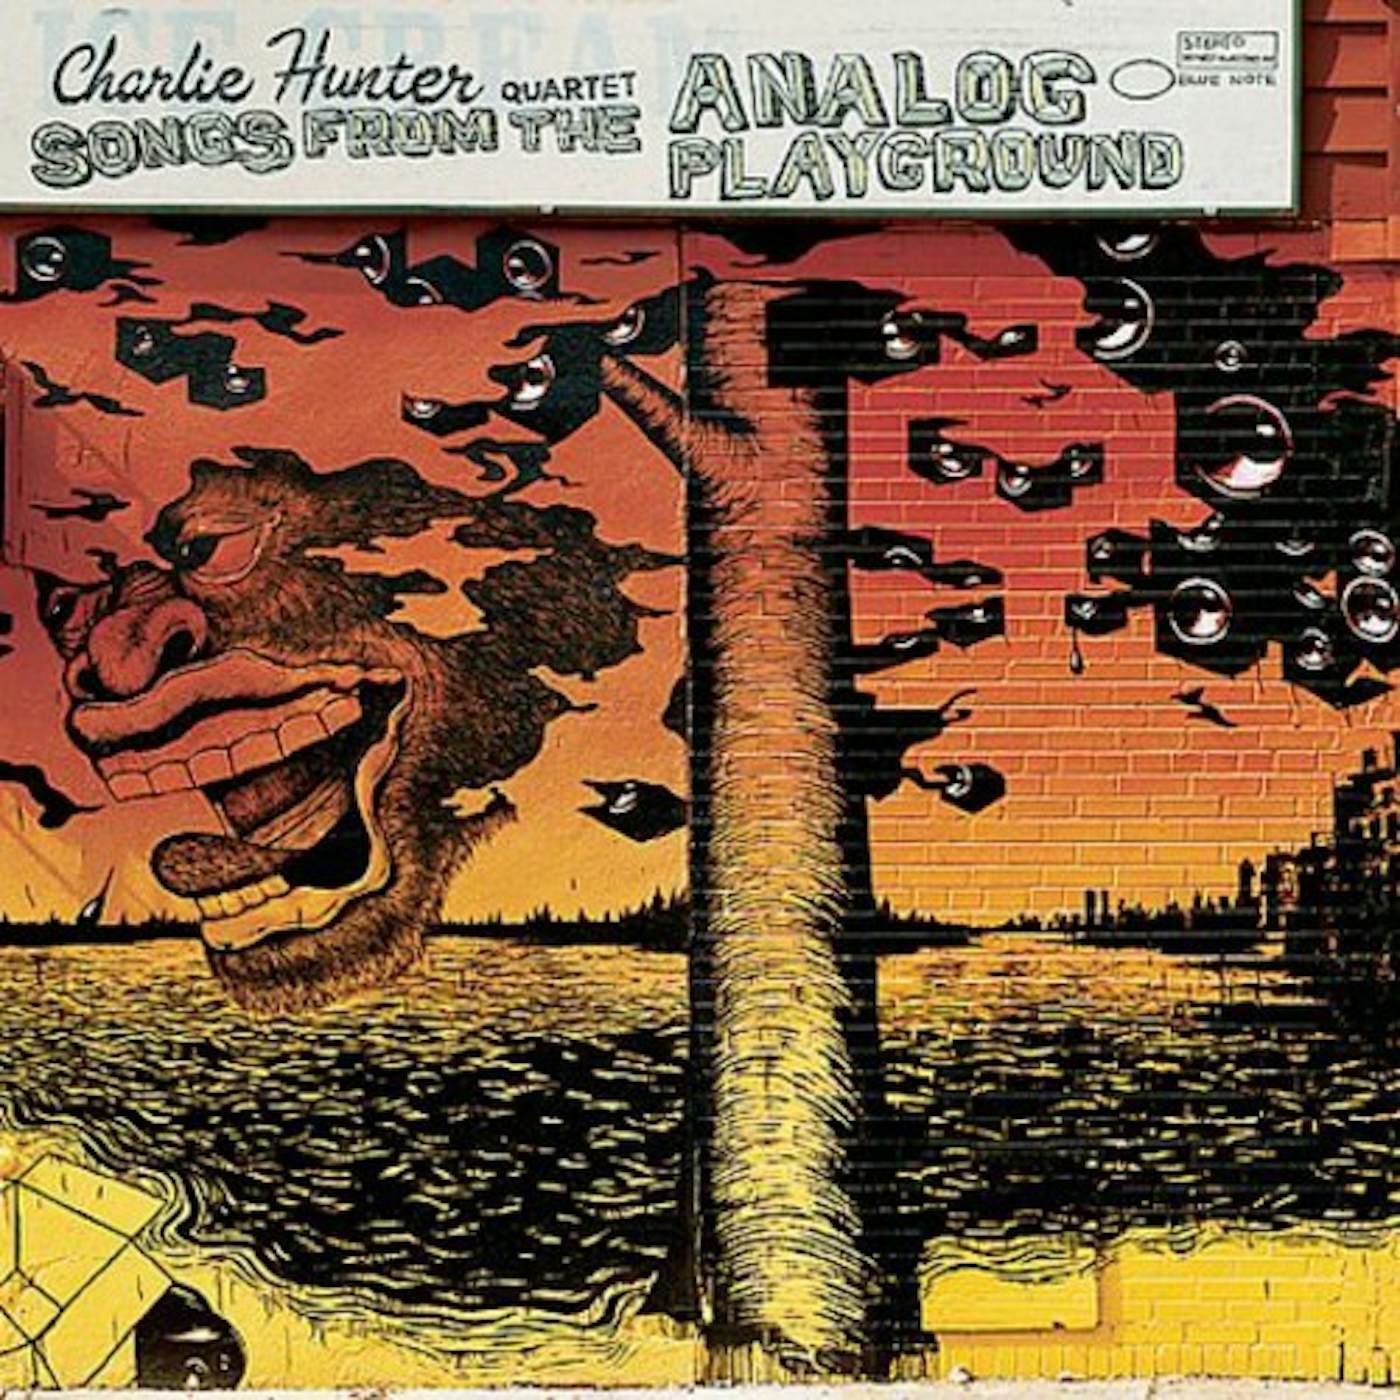 Charlie Hunter SONGS FROM THE ANALOG PLAYGROUND CD